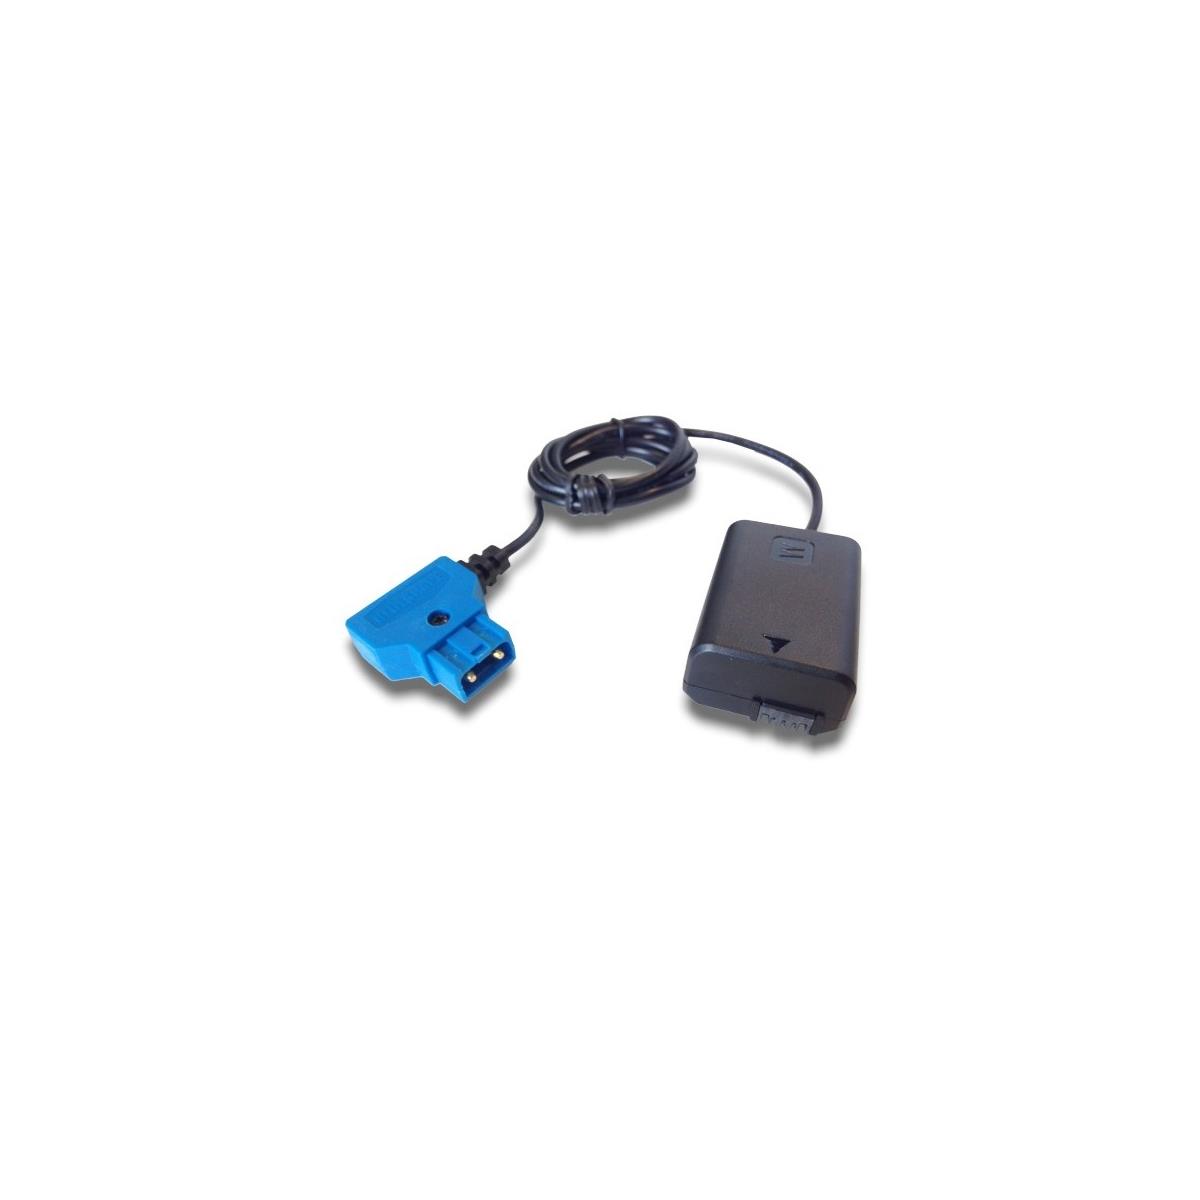 Image of BlueShape BPA-002 Adapter for Sony Cameras